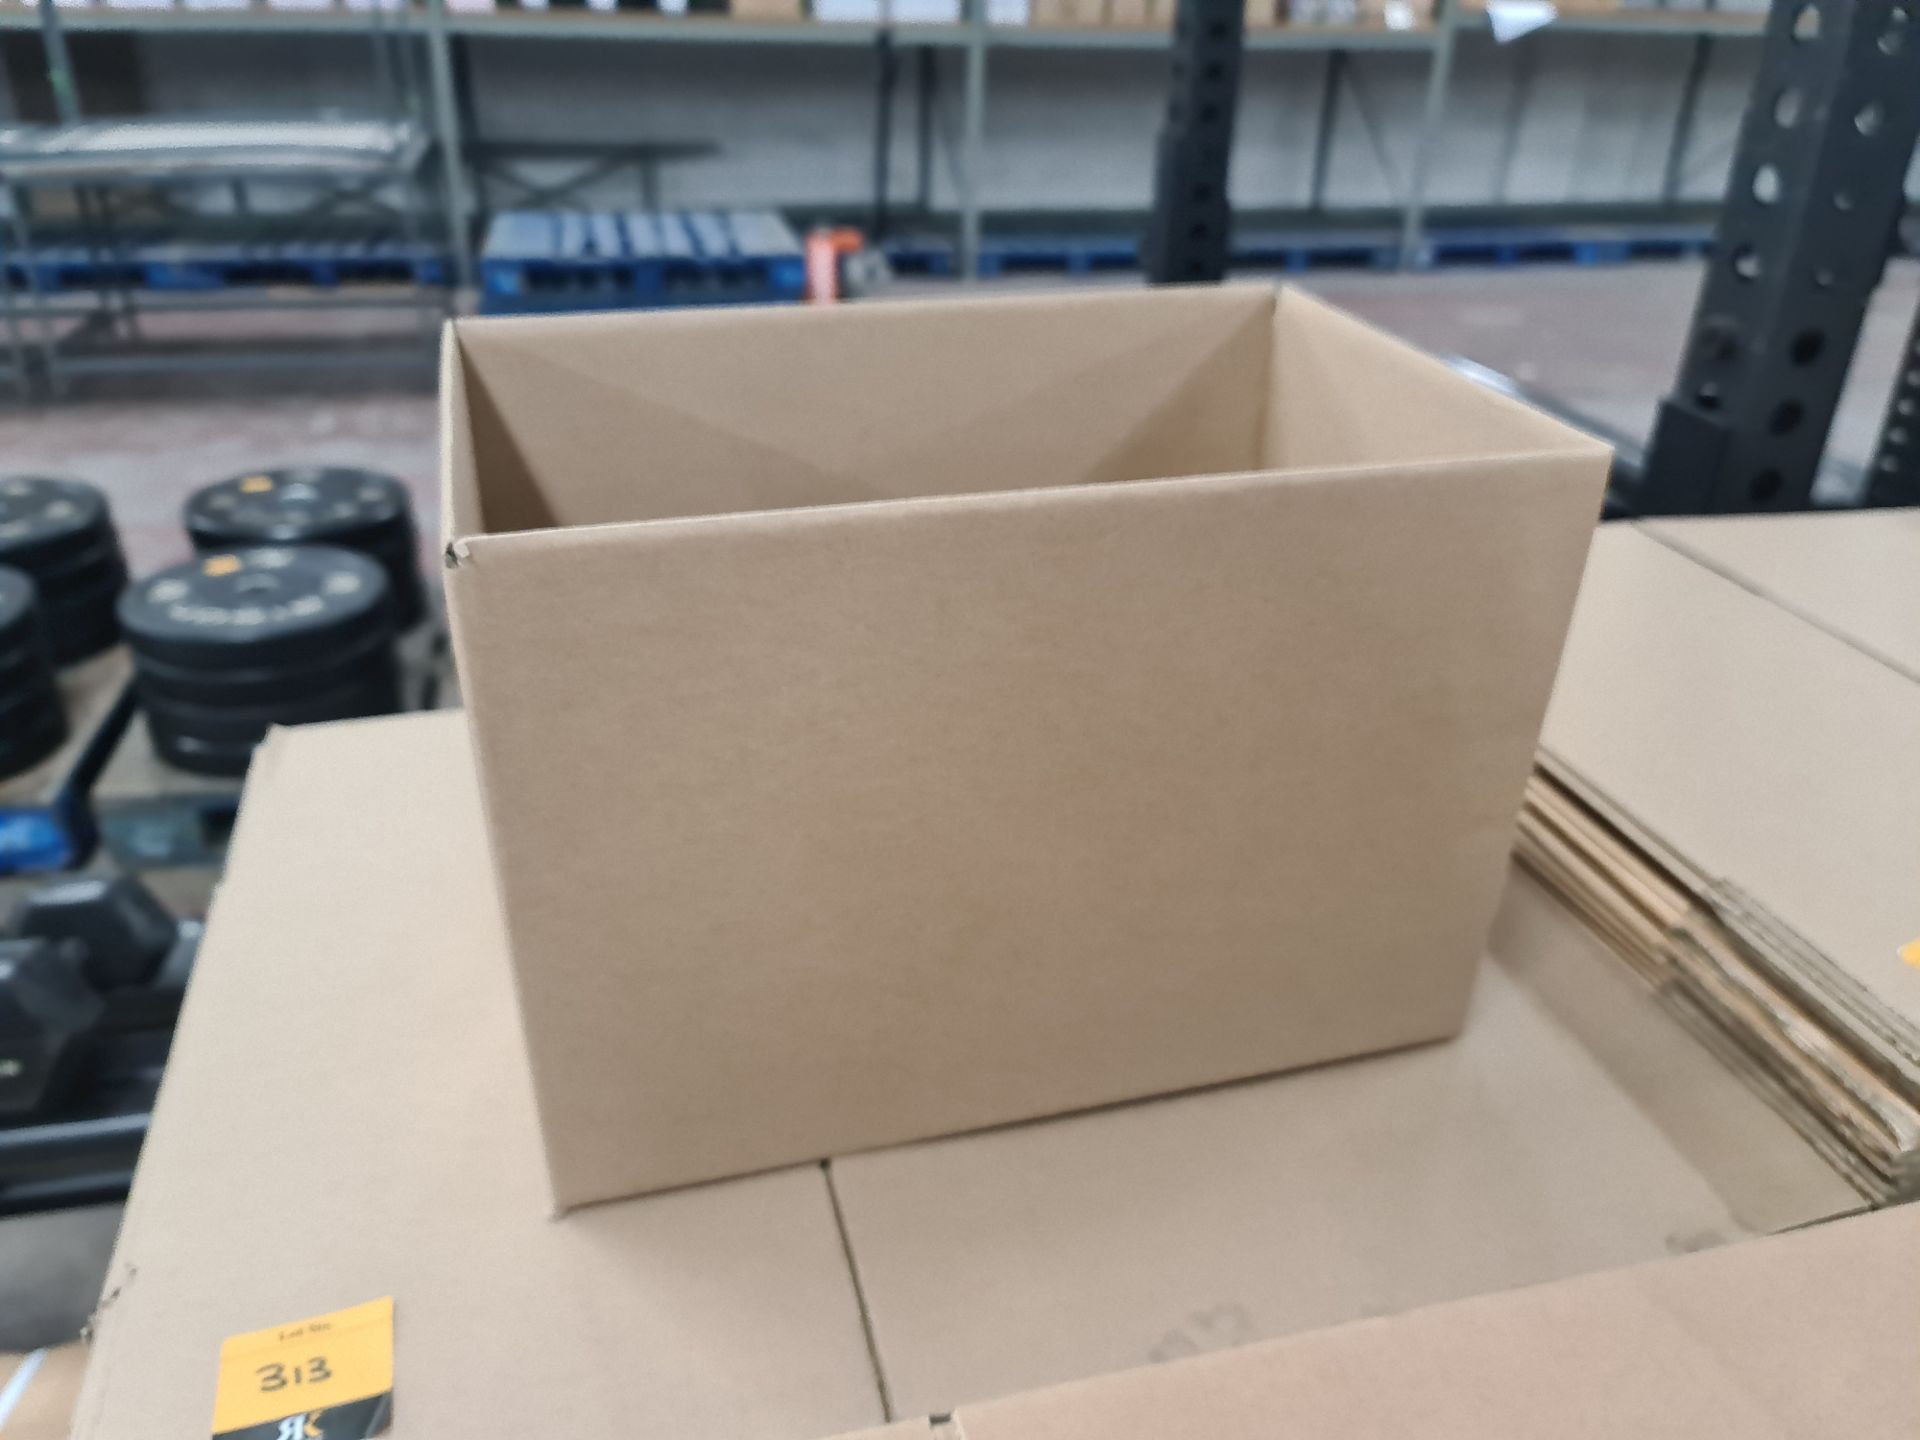 Approximately 170 cardboard boxes; 350 mm x 227 mm x 240 mm